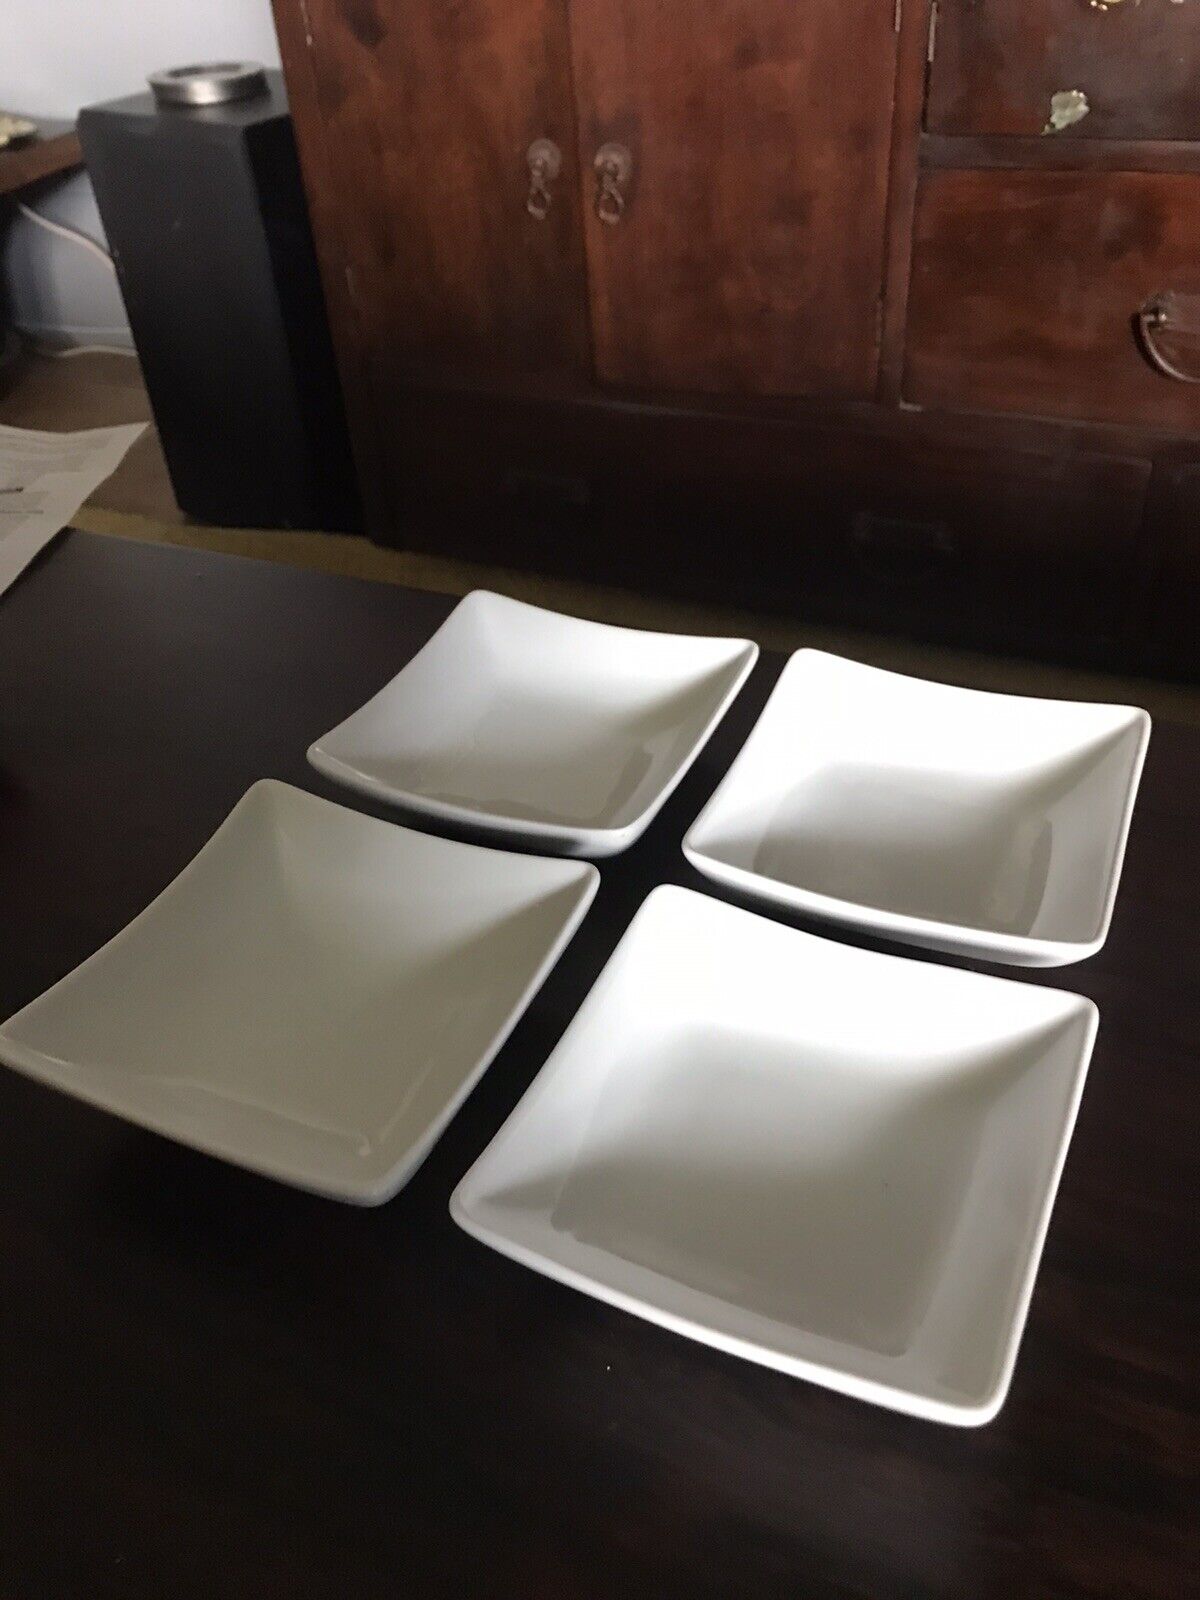 4 AMERICAN AIRLINES larger Tray 4.75sq” sushi, dessert, Salad plates/tray VTG.